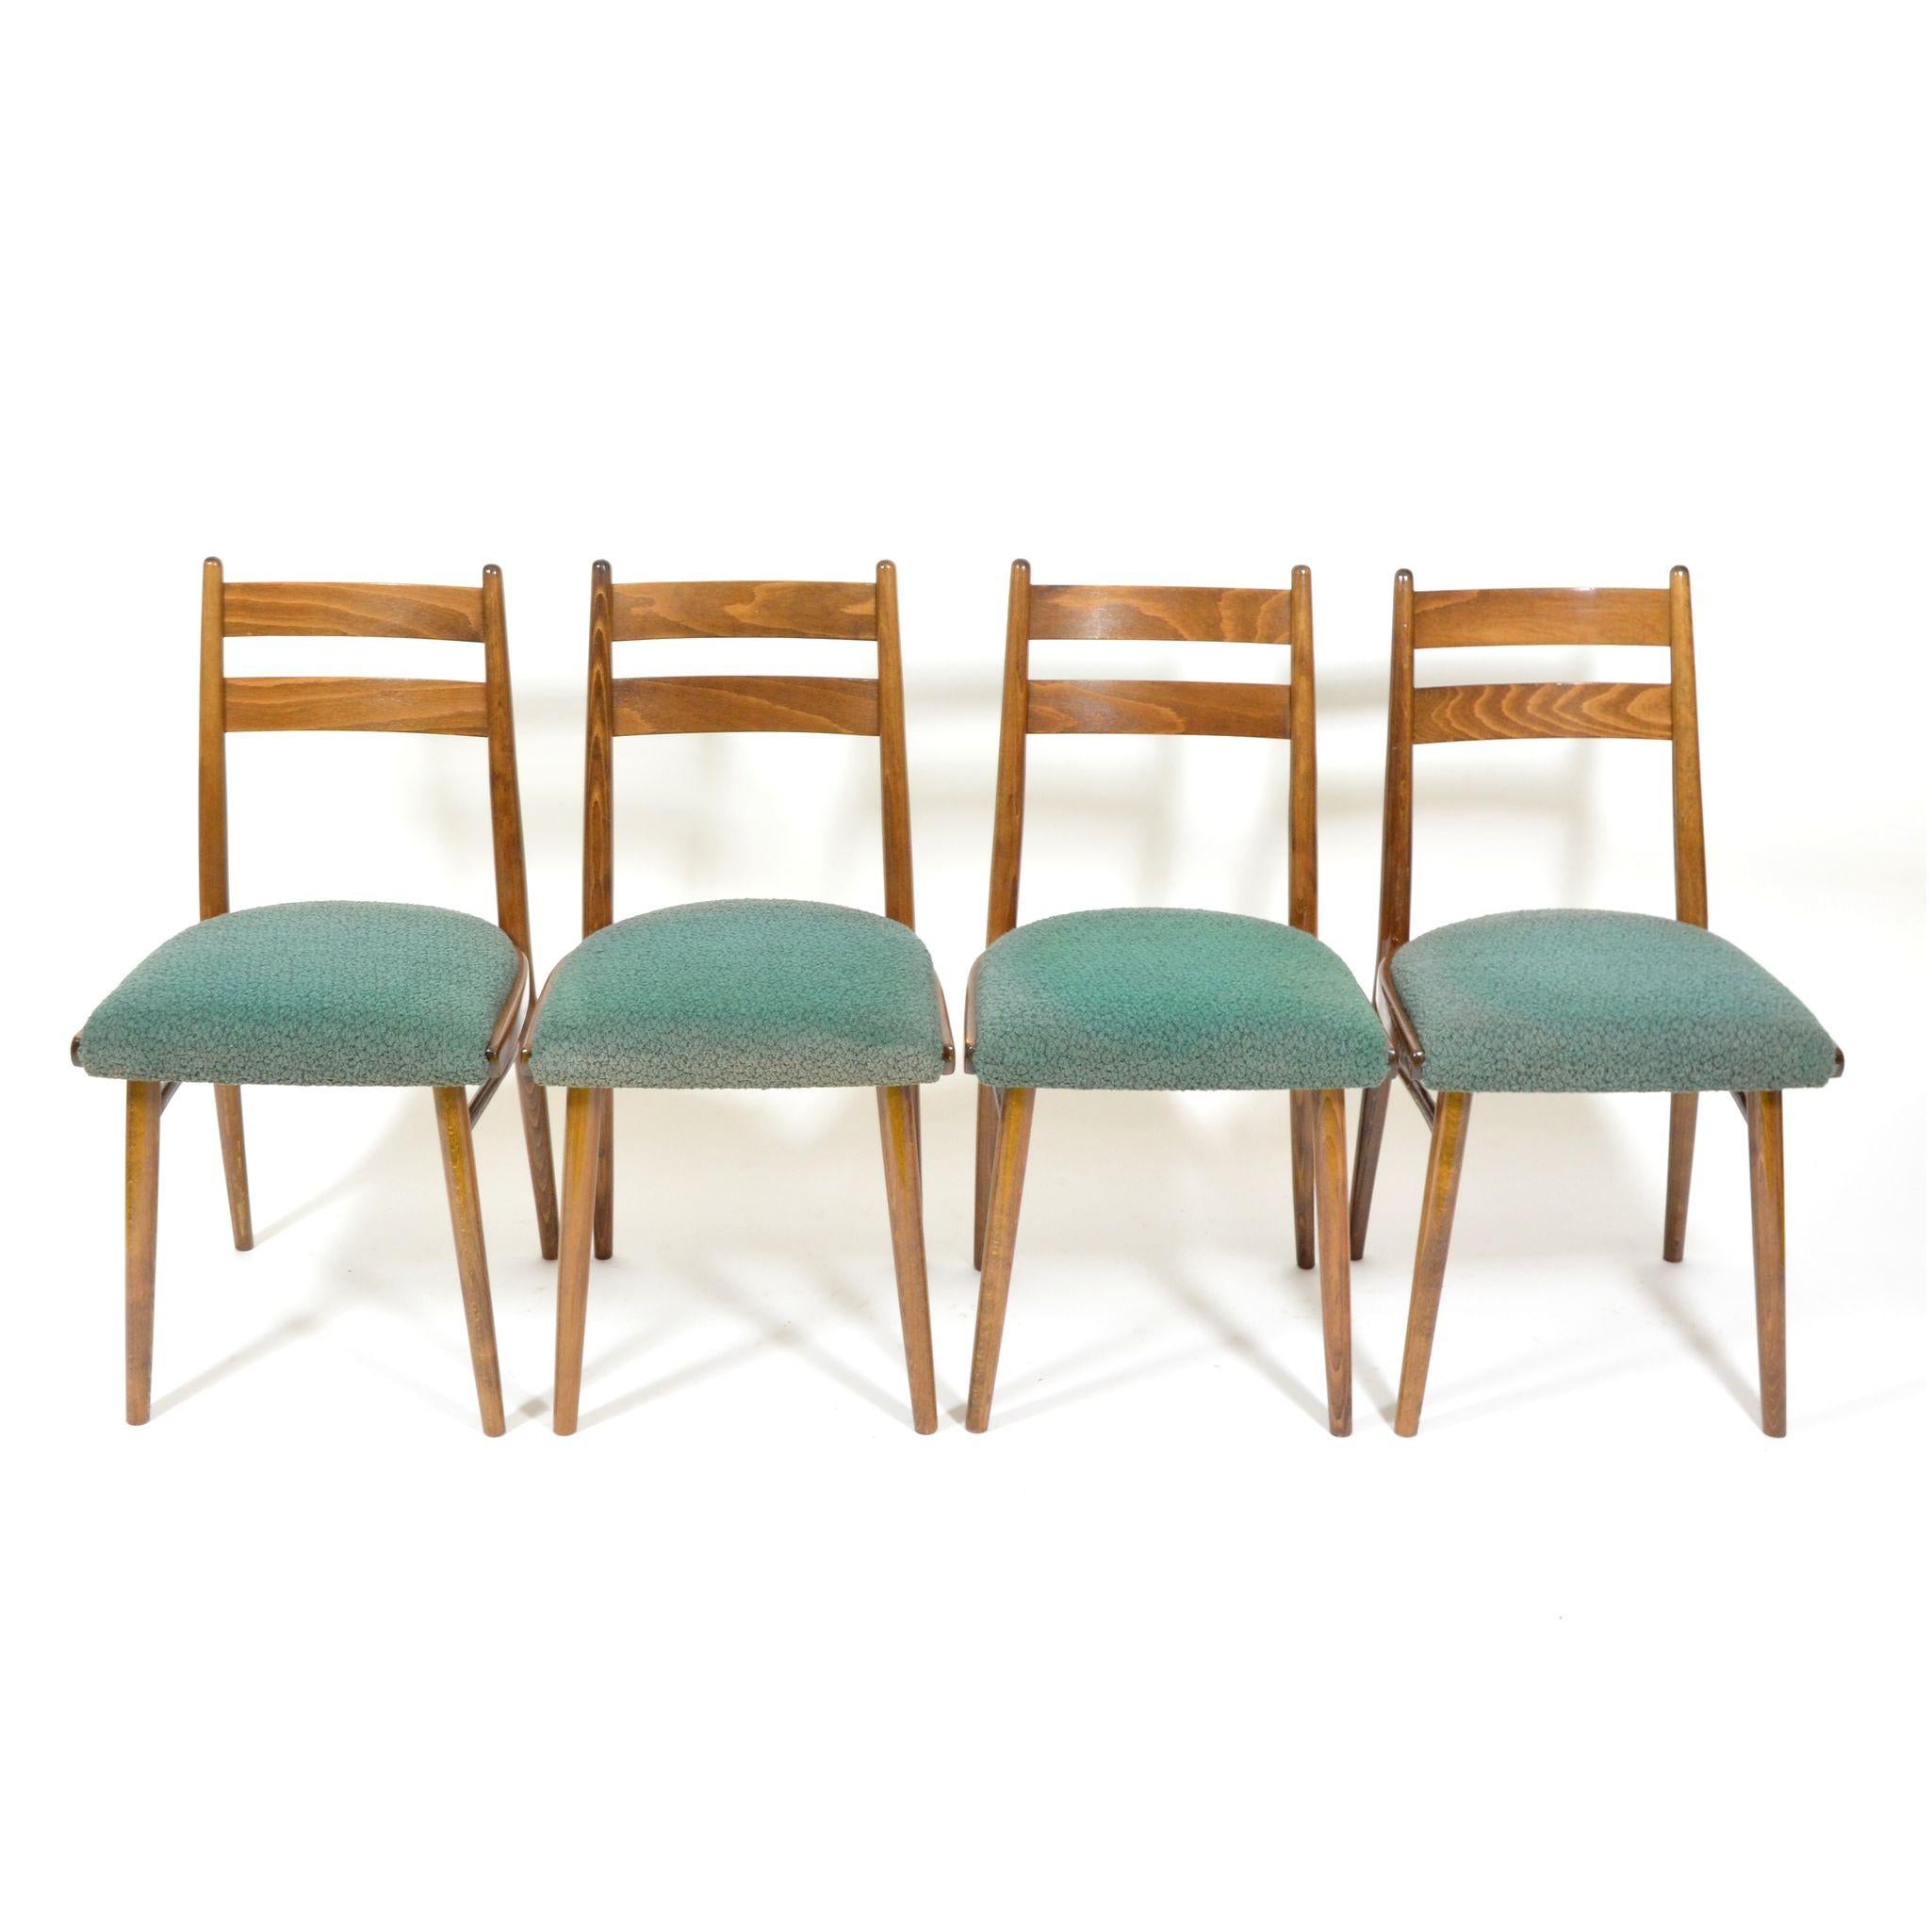 Set of Four Vintage Dining Chairs, Green Seats, Czechoslovakia, 1970s 2